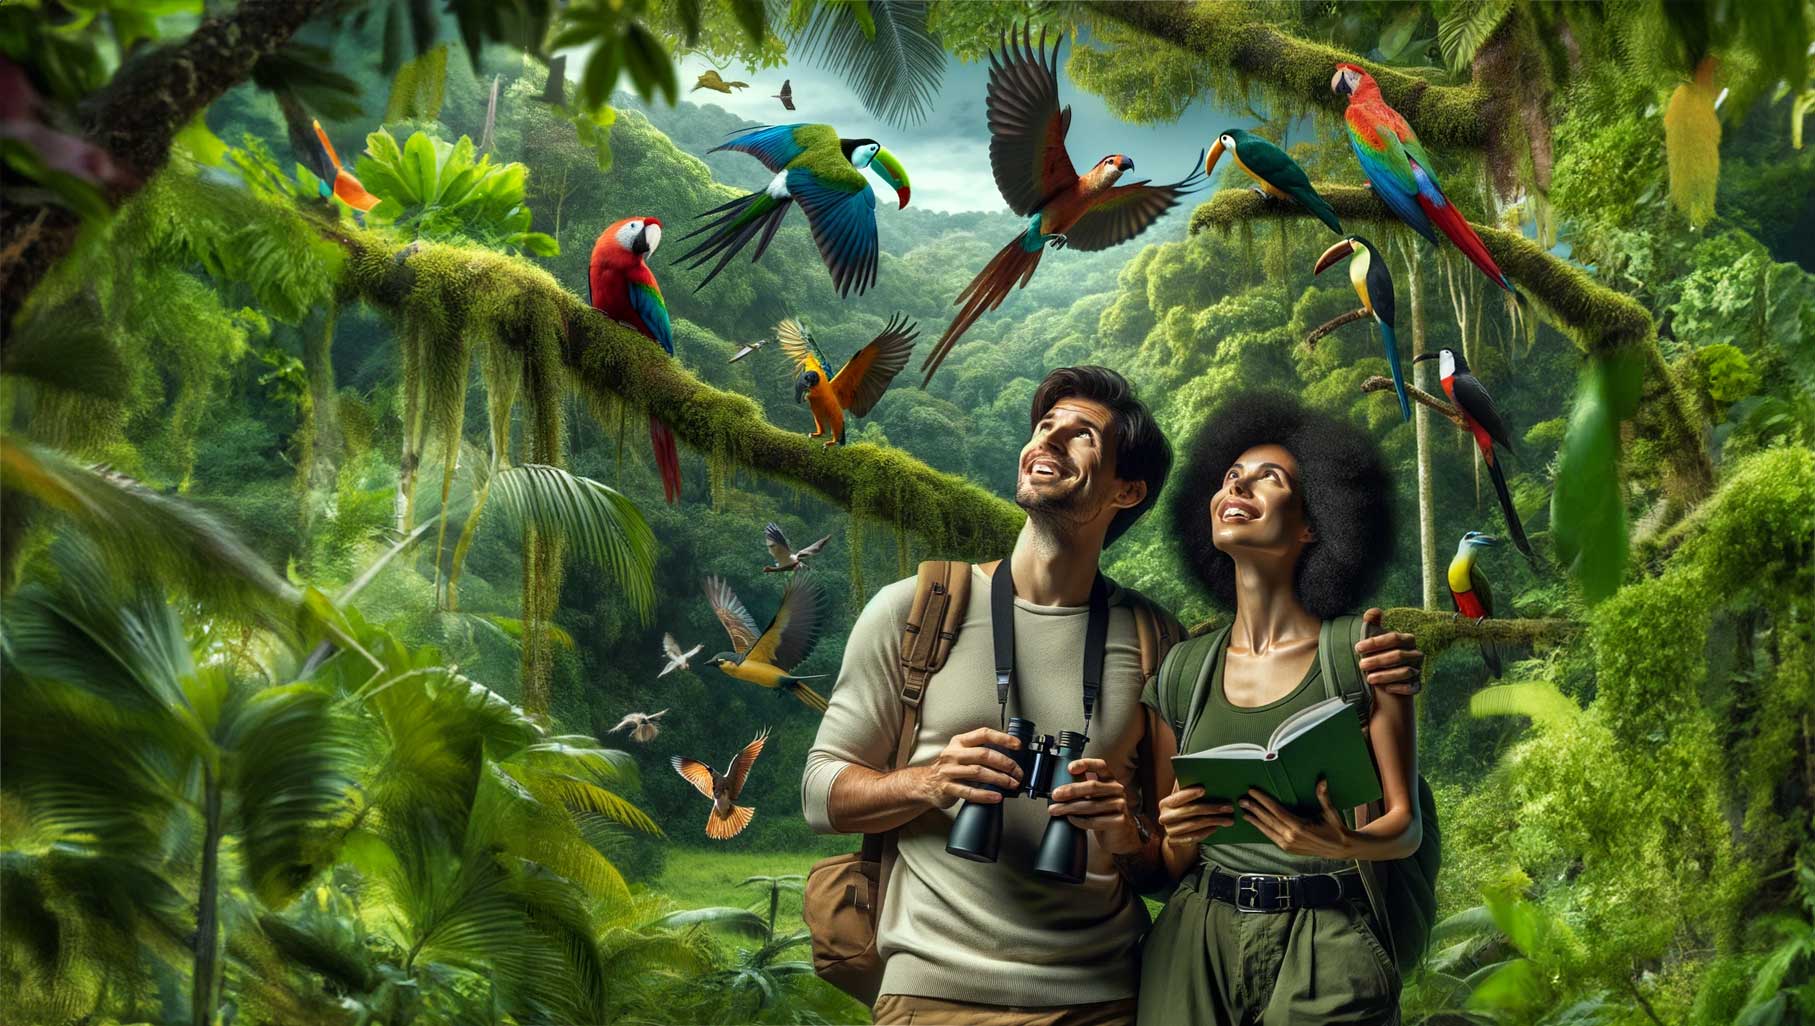 A happy couple during a Birdwatching immersion in a tropical destination.